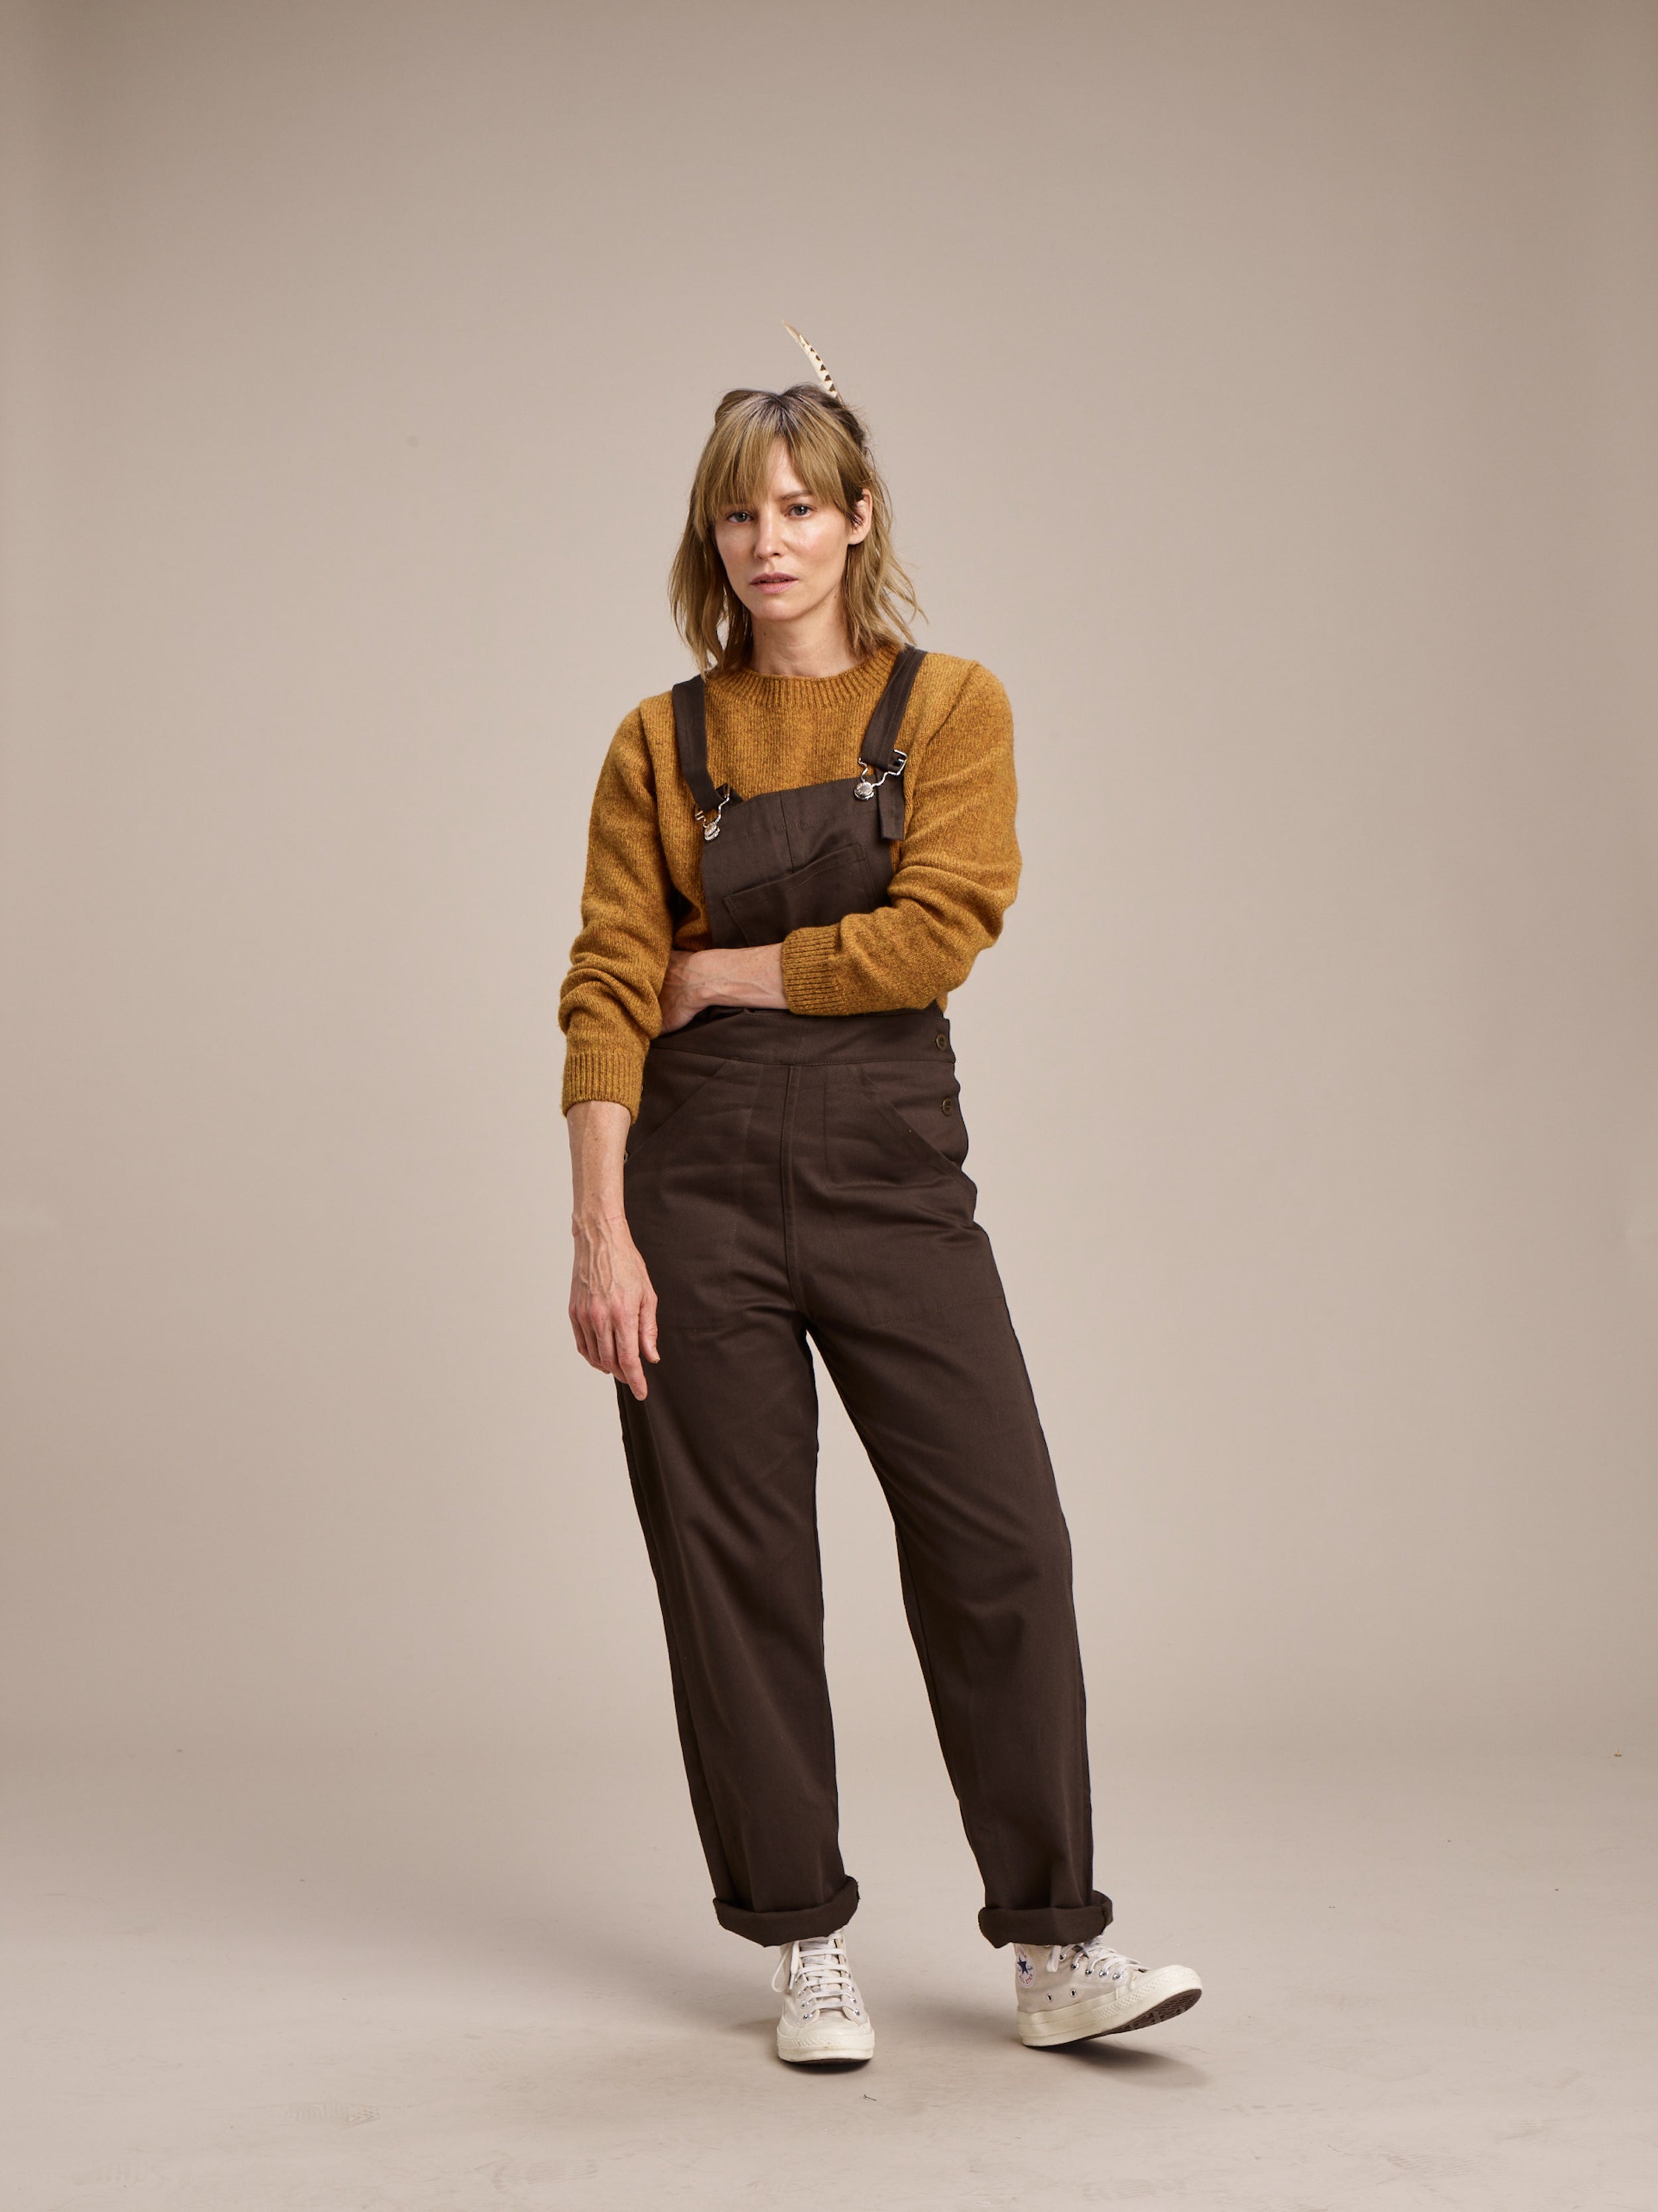 Woman wears Carrier Company Women's Dungarees in Olive with Shetland Lambswool Jumper